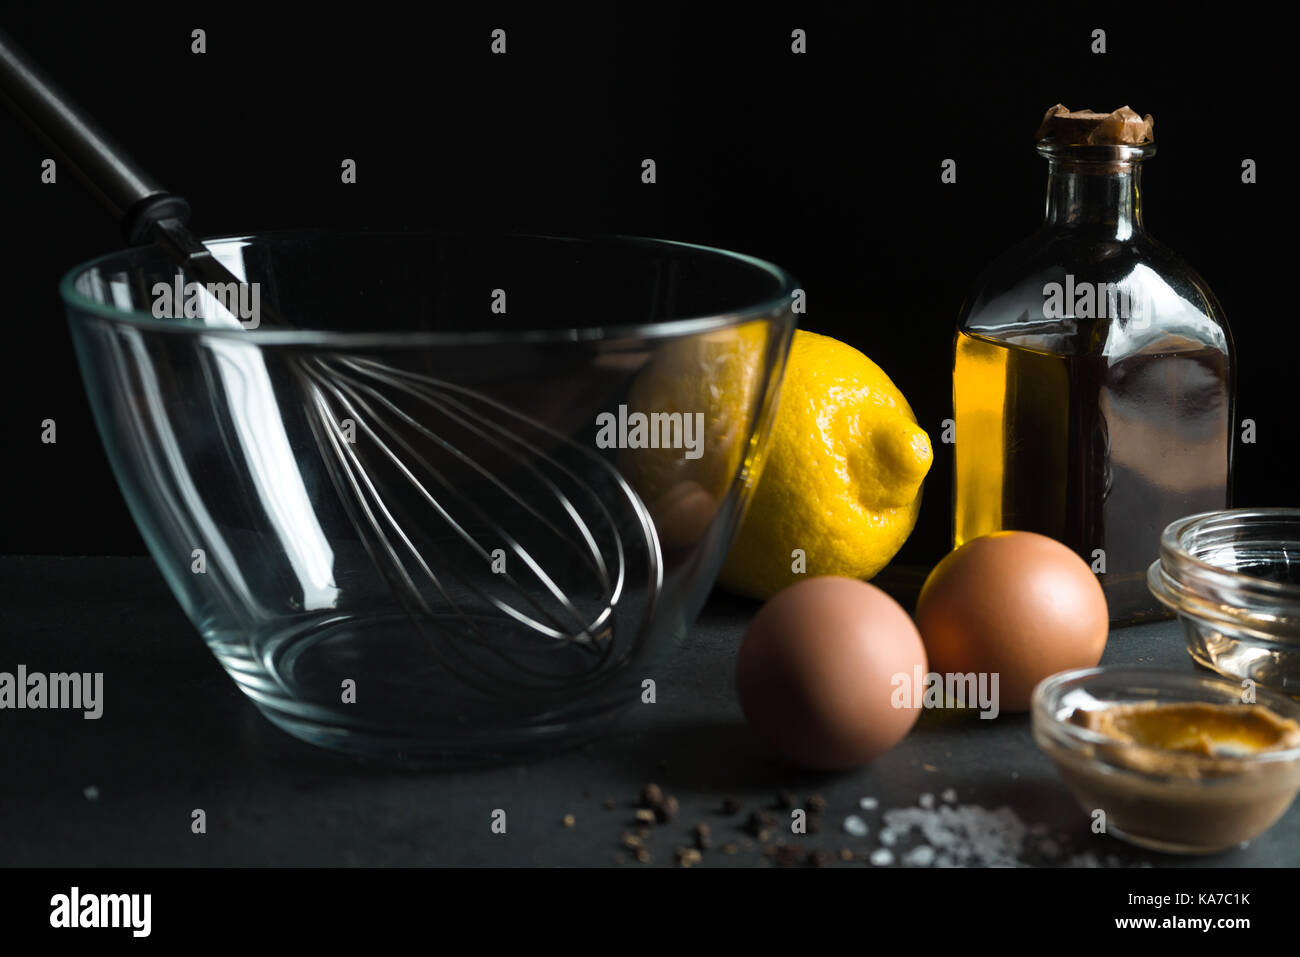 Eggs, olive oil, mustard on a black background horizontal Stock Photo